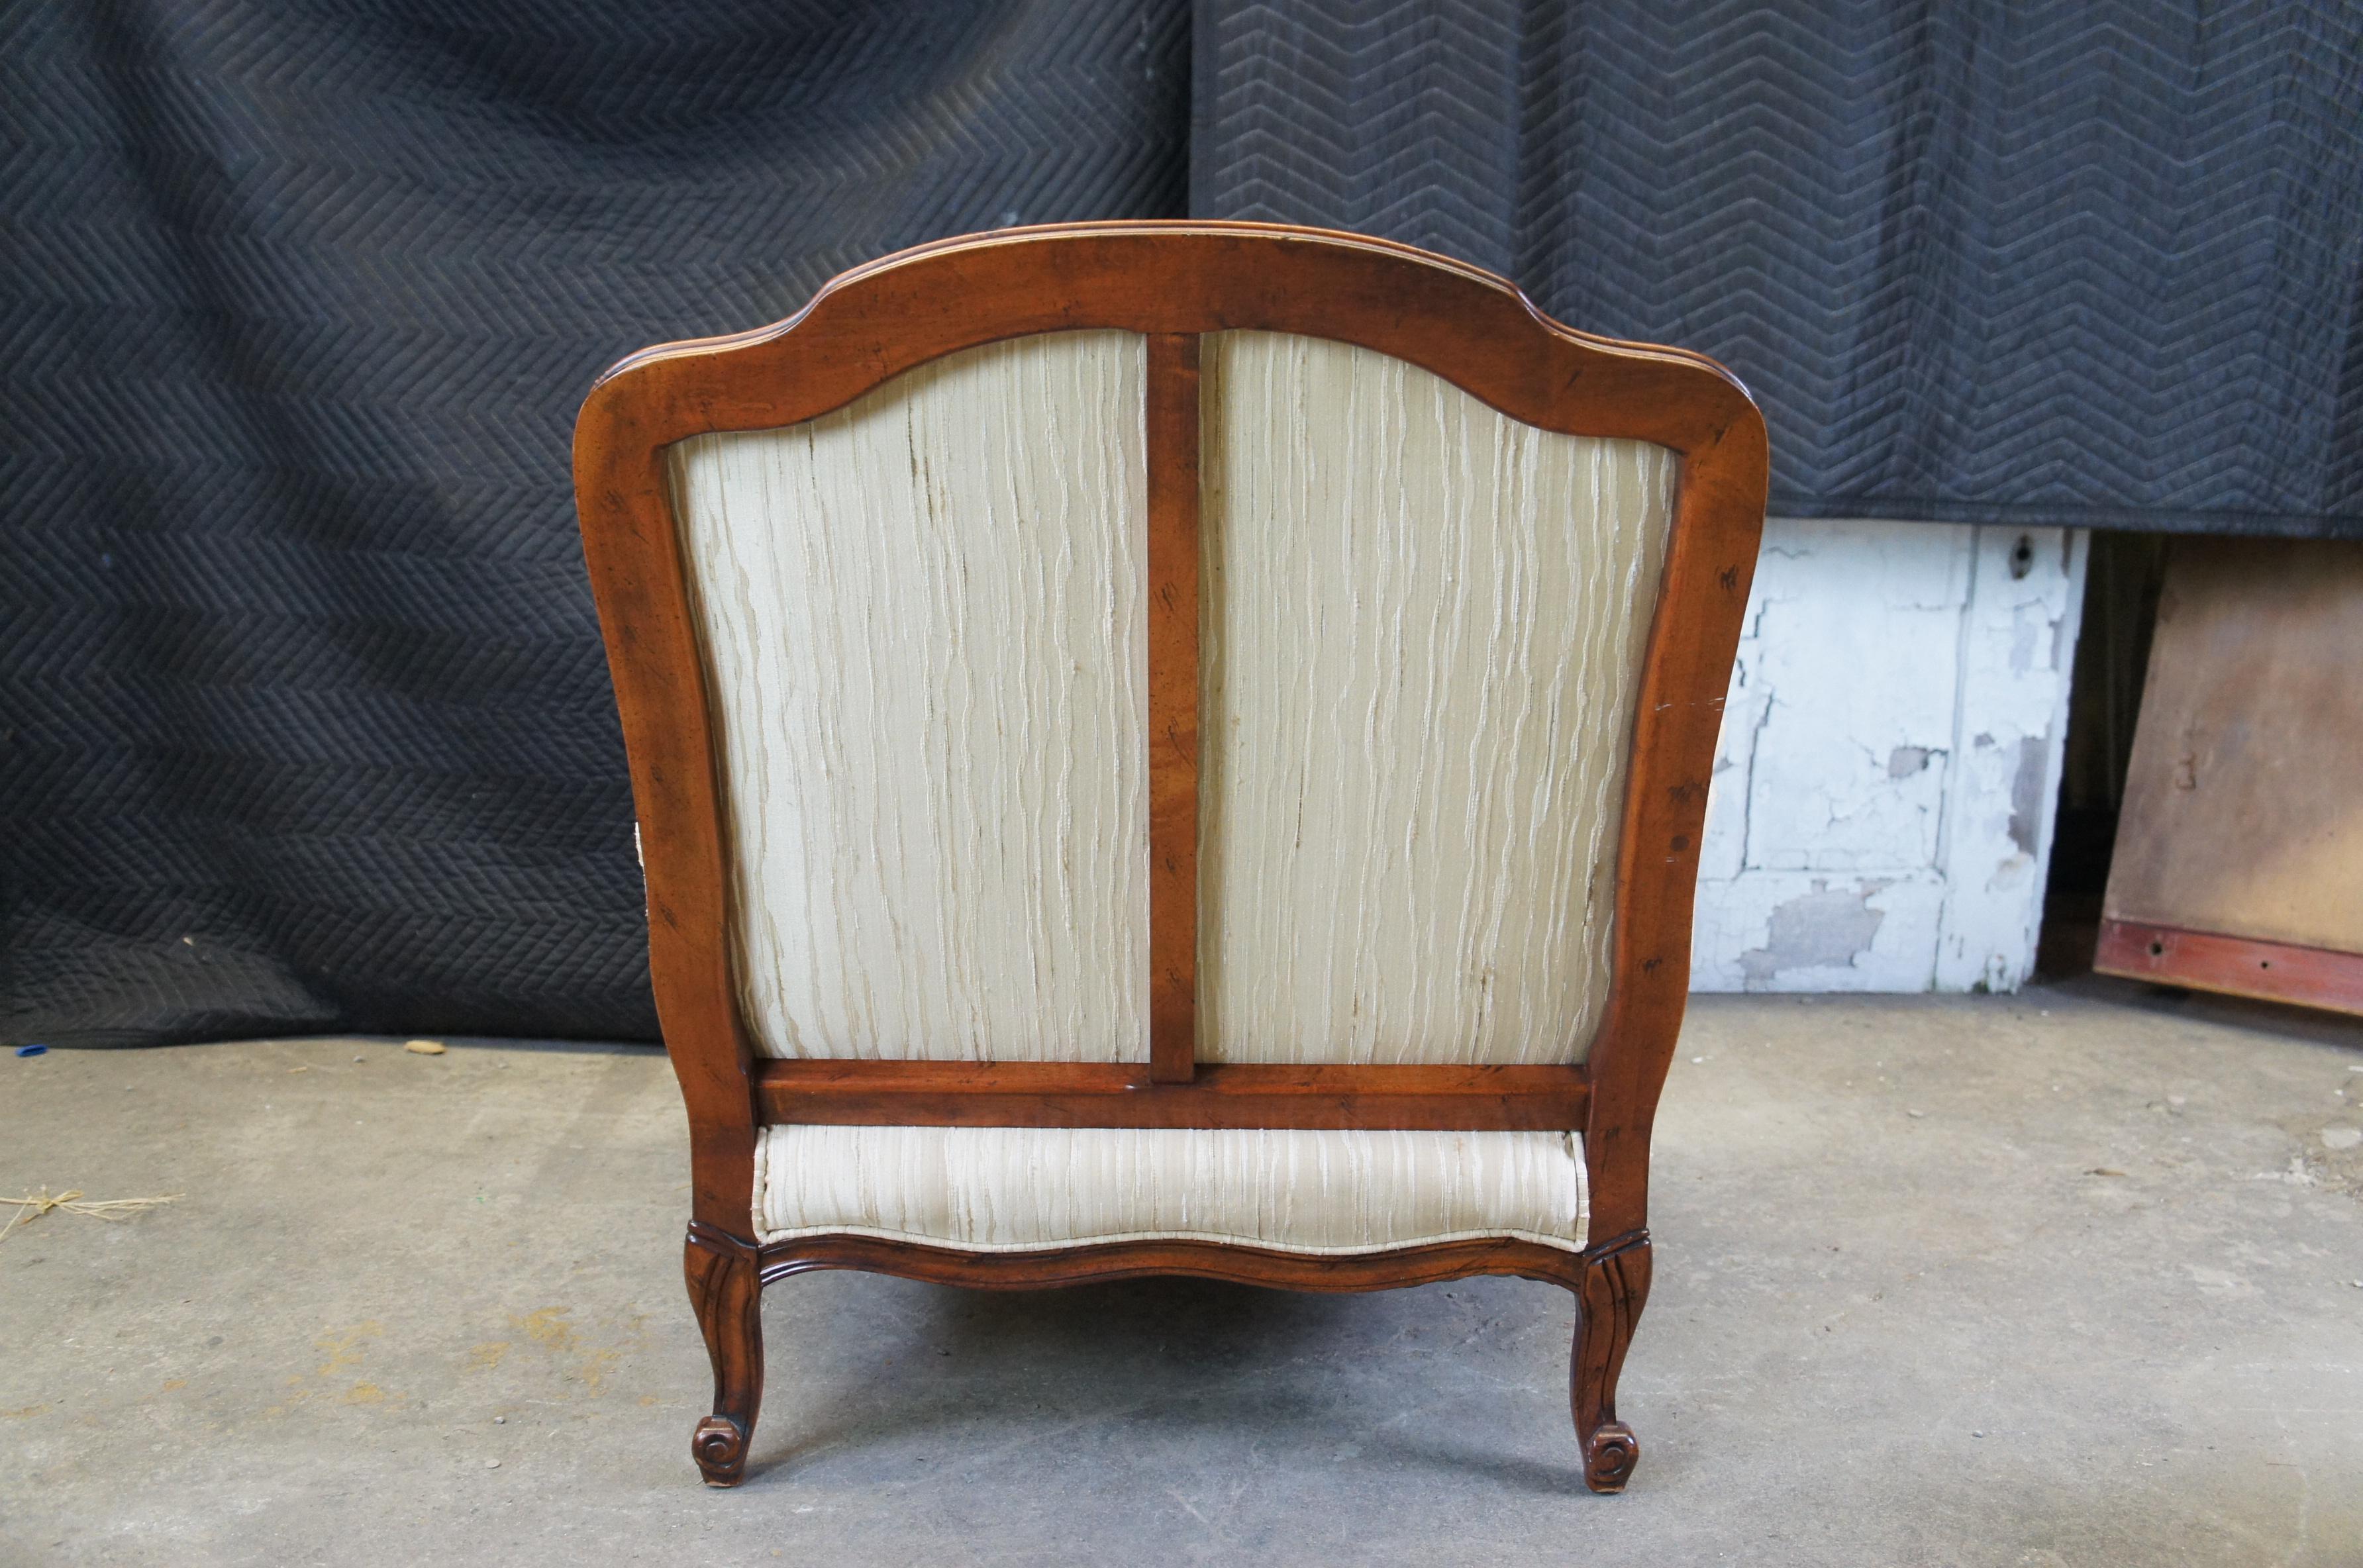 Upholstery Sam Moore French Country Walnut Bergere Fauteuil Club Lounge Arm Chair Ottoman